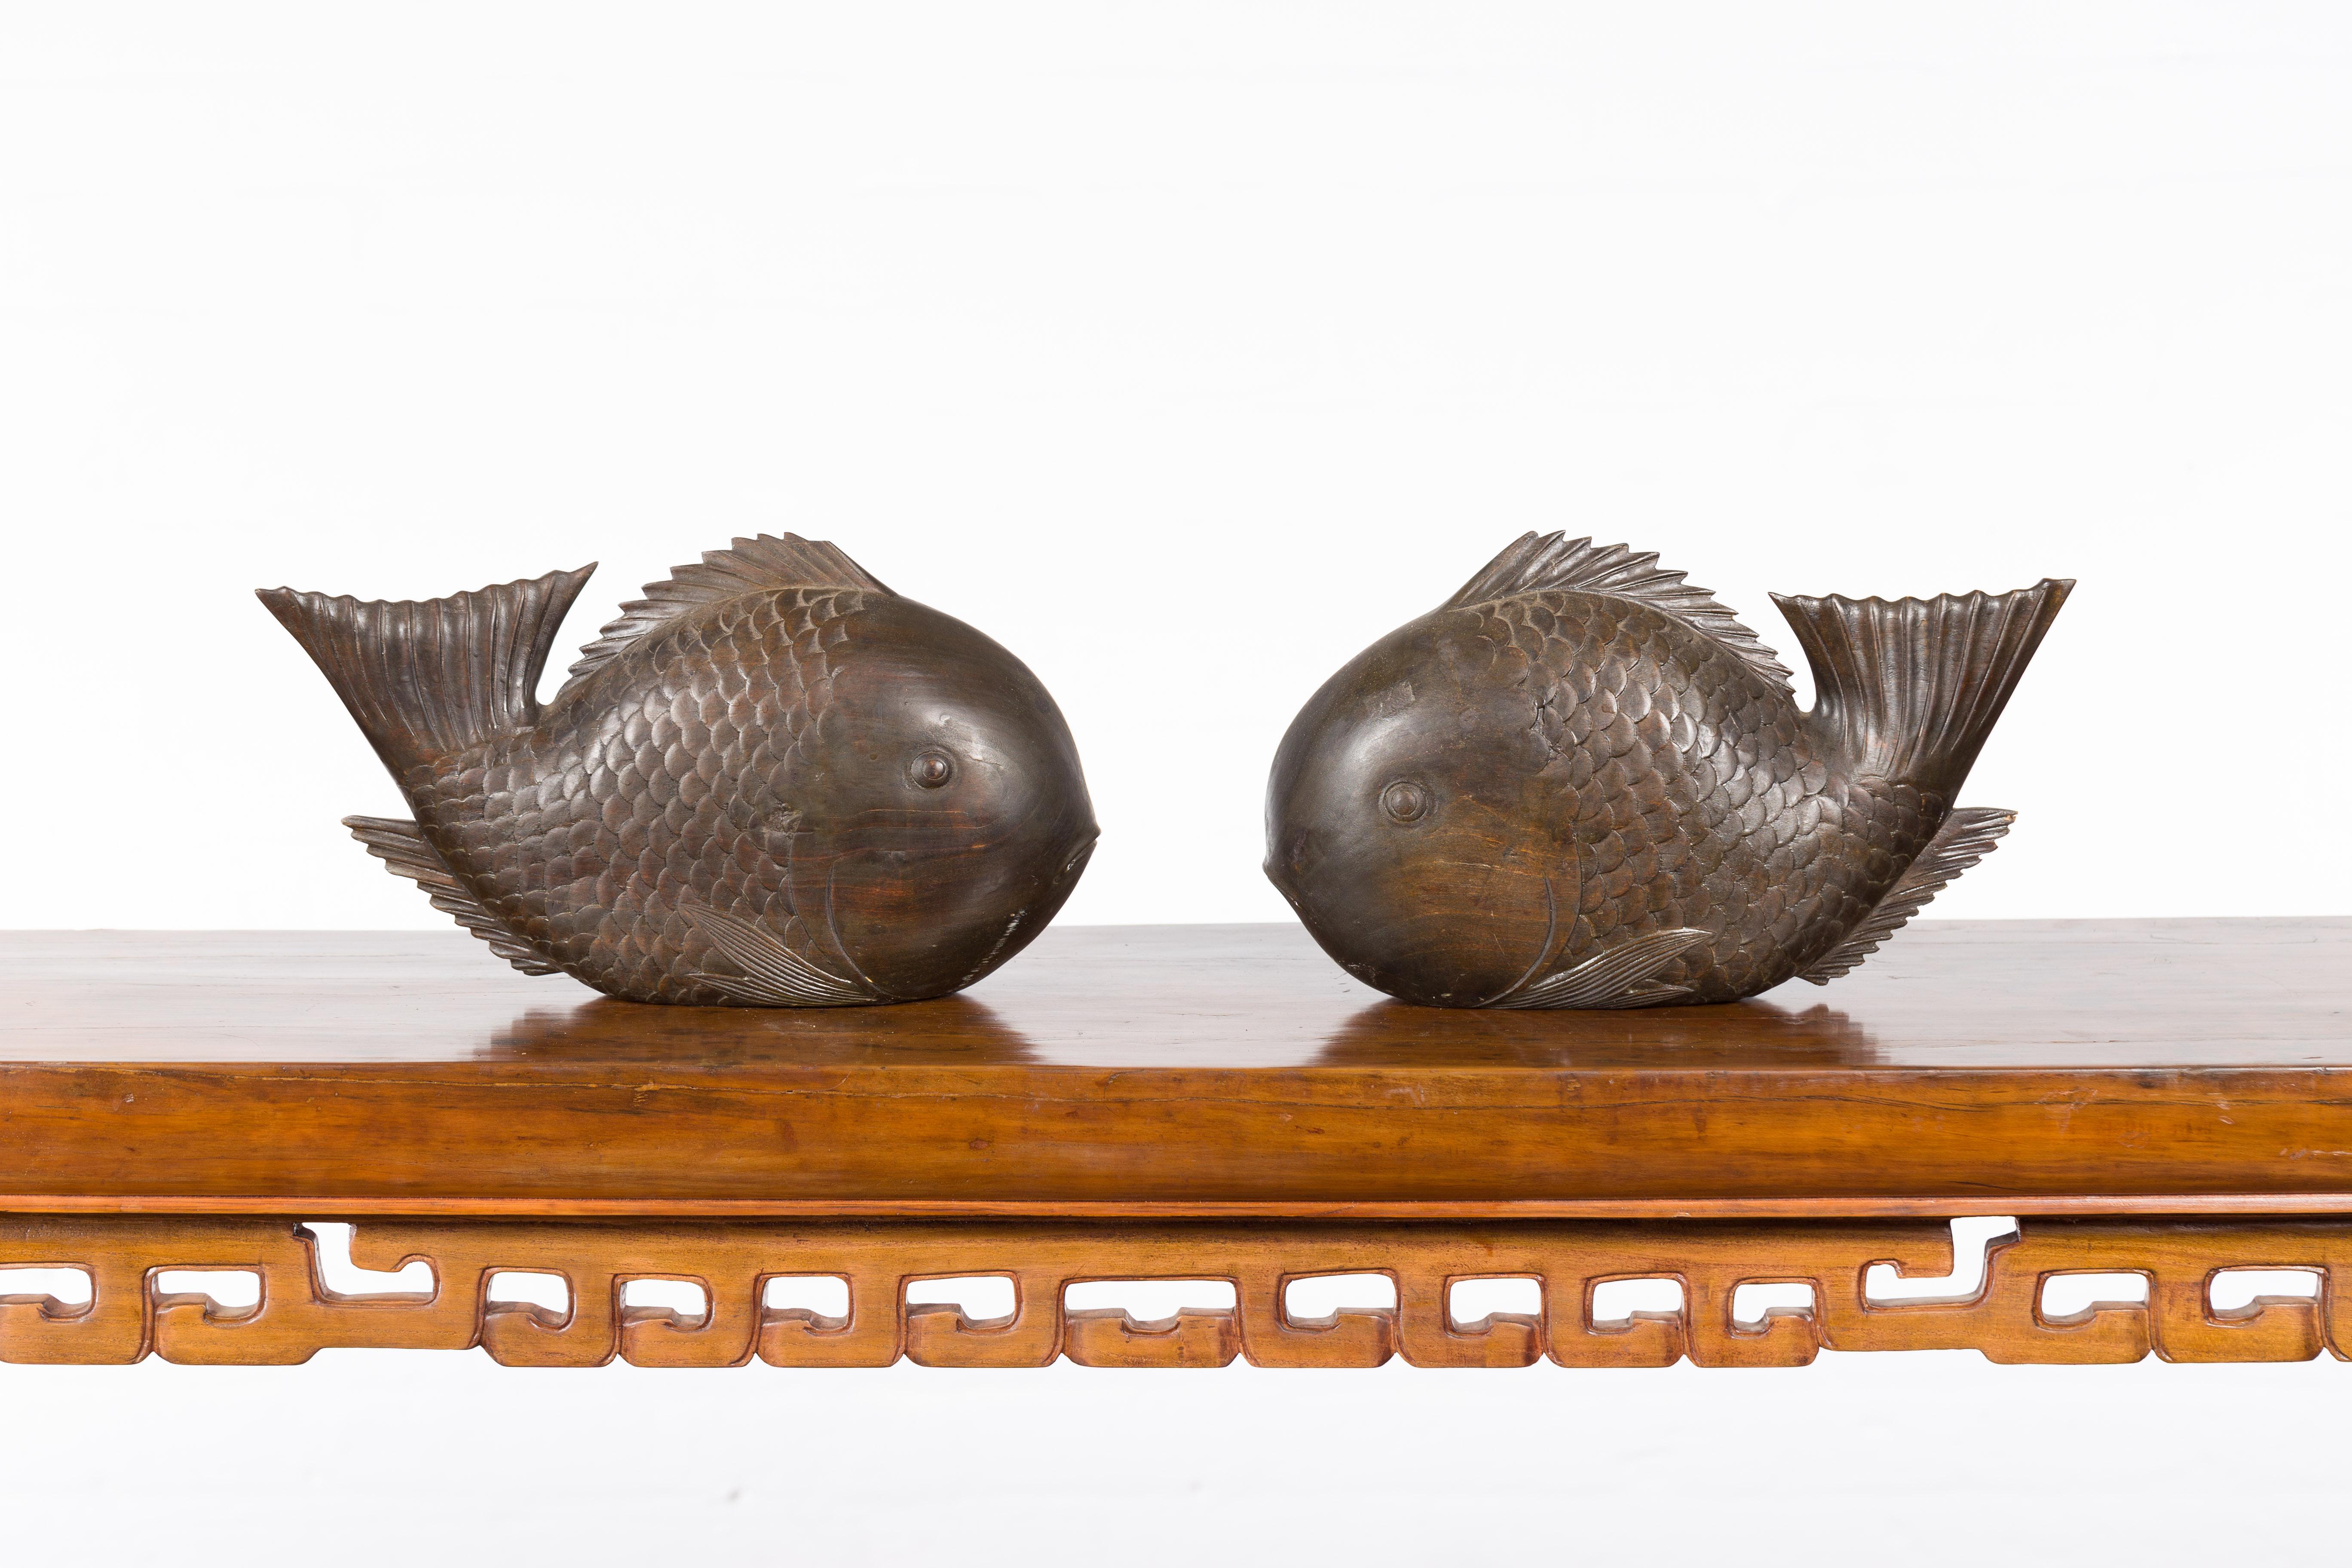 20th Century Vintage Thai Carved Wooden Carp Sculpture with Detailed Scales and Dark Patina